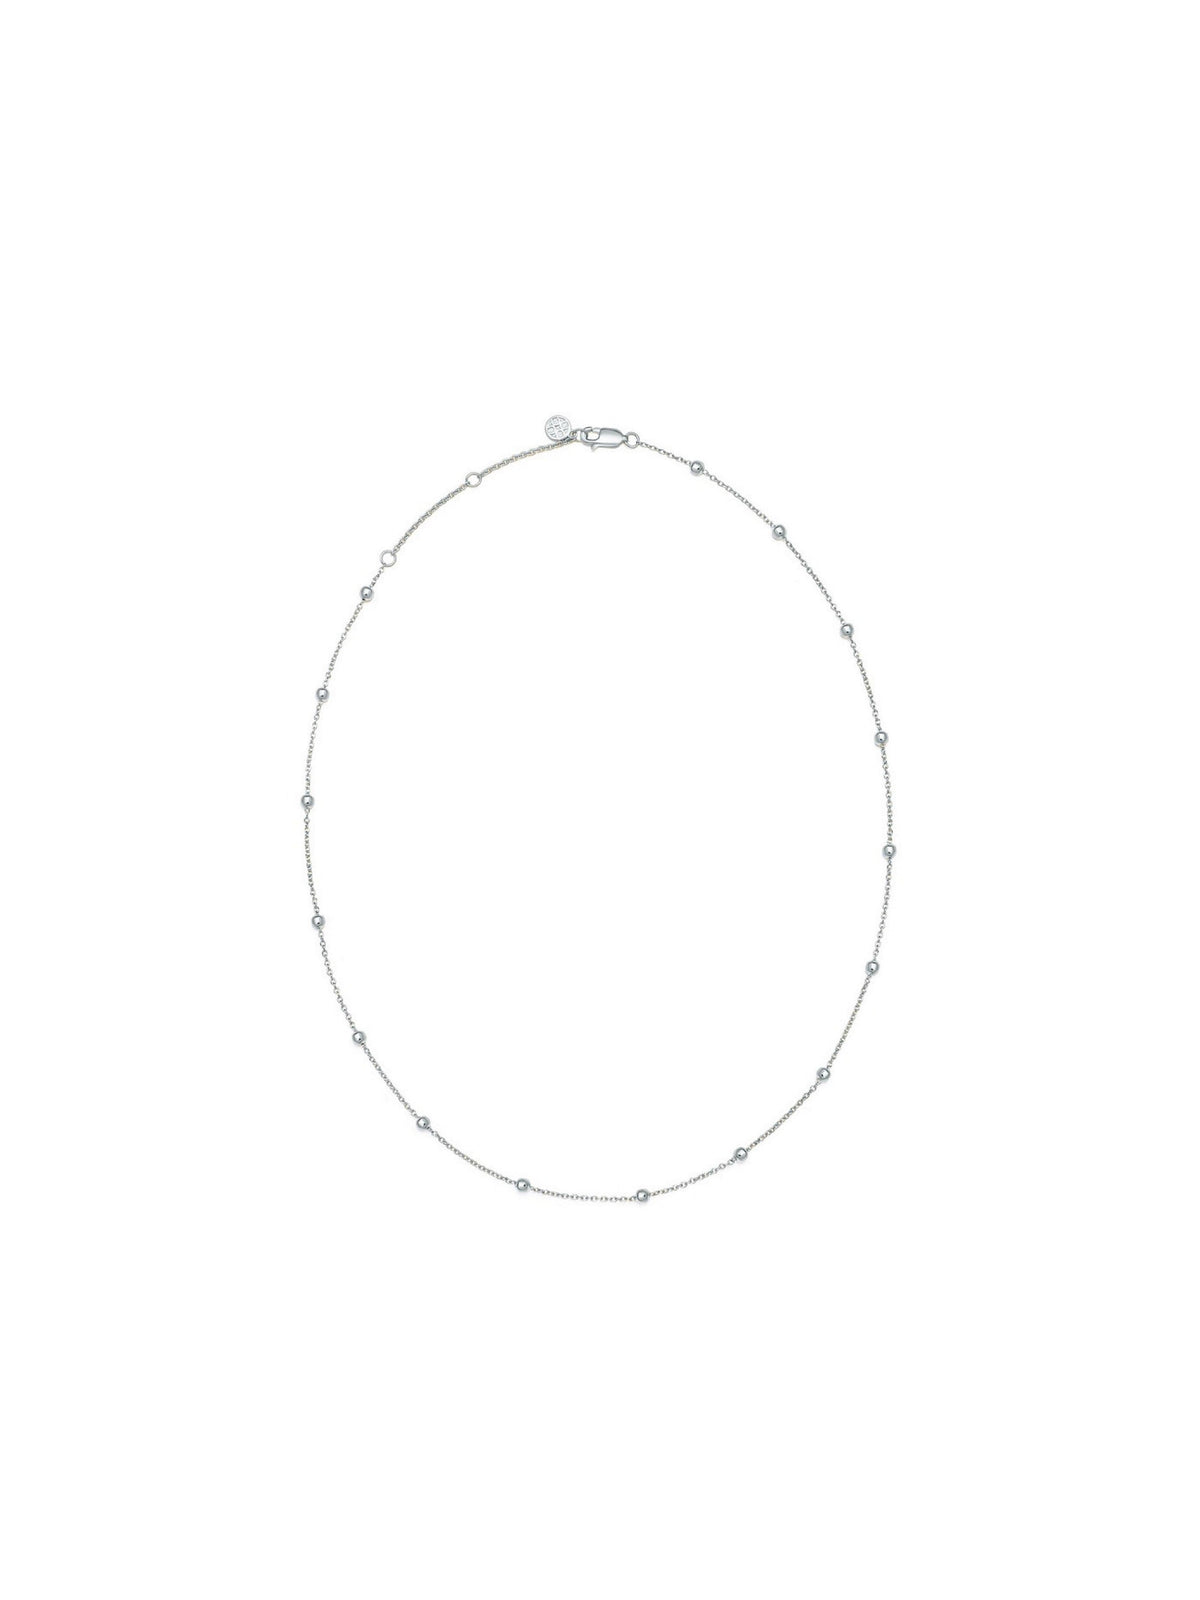 Blissful Time Necklace- Oval Link (White) - Orange Cube